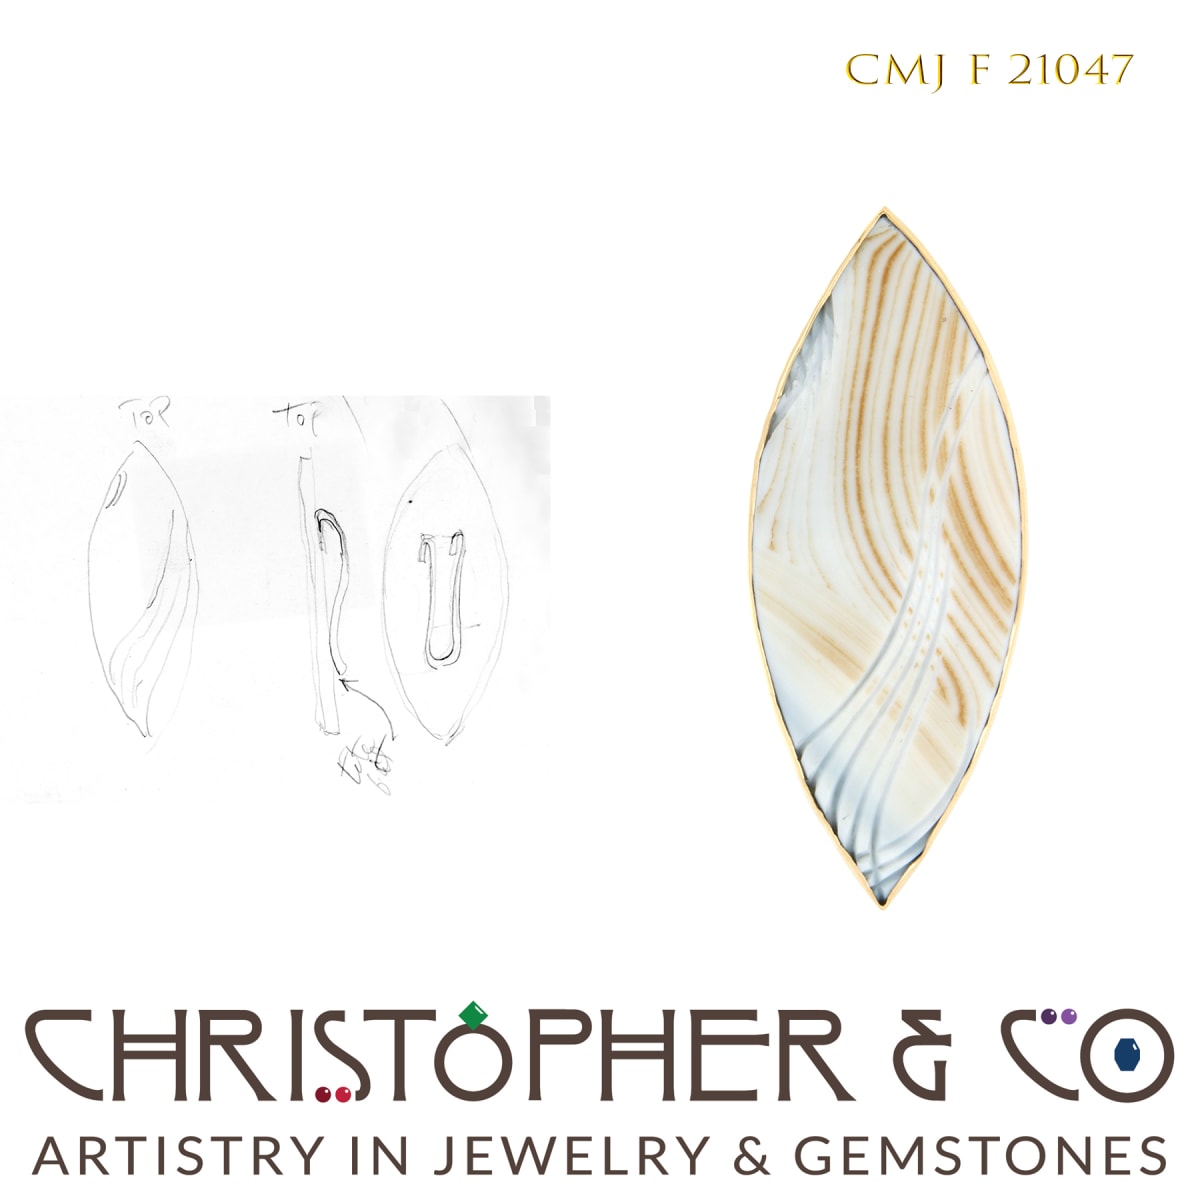 CMJ F 21047 Gold Hair Clip designed by Christopher M. Jupp set with handcarved agate by Darryl Alexander  Image: CMJ F 21047 Gold Hair Clip designed by Christopher M. Jupp set with handcarved agate by Darryl Alexander